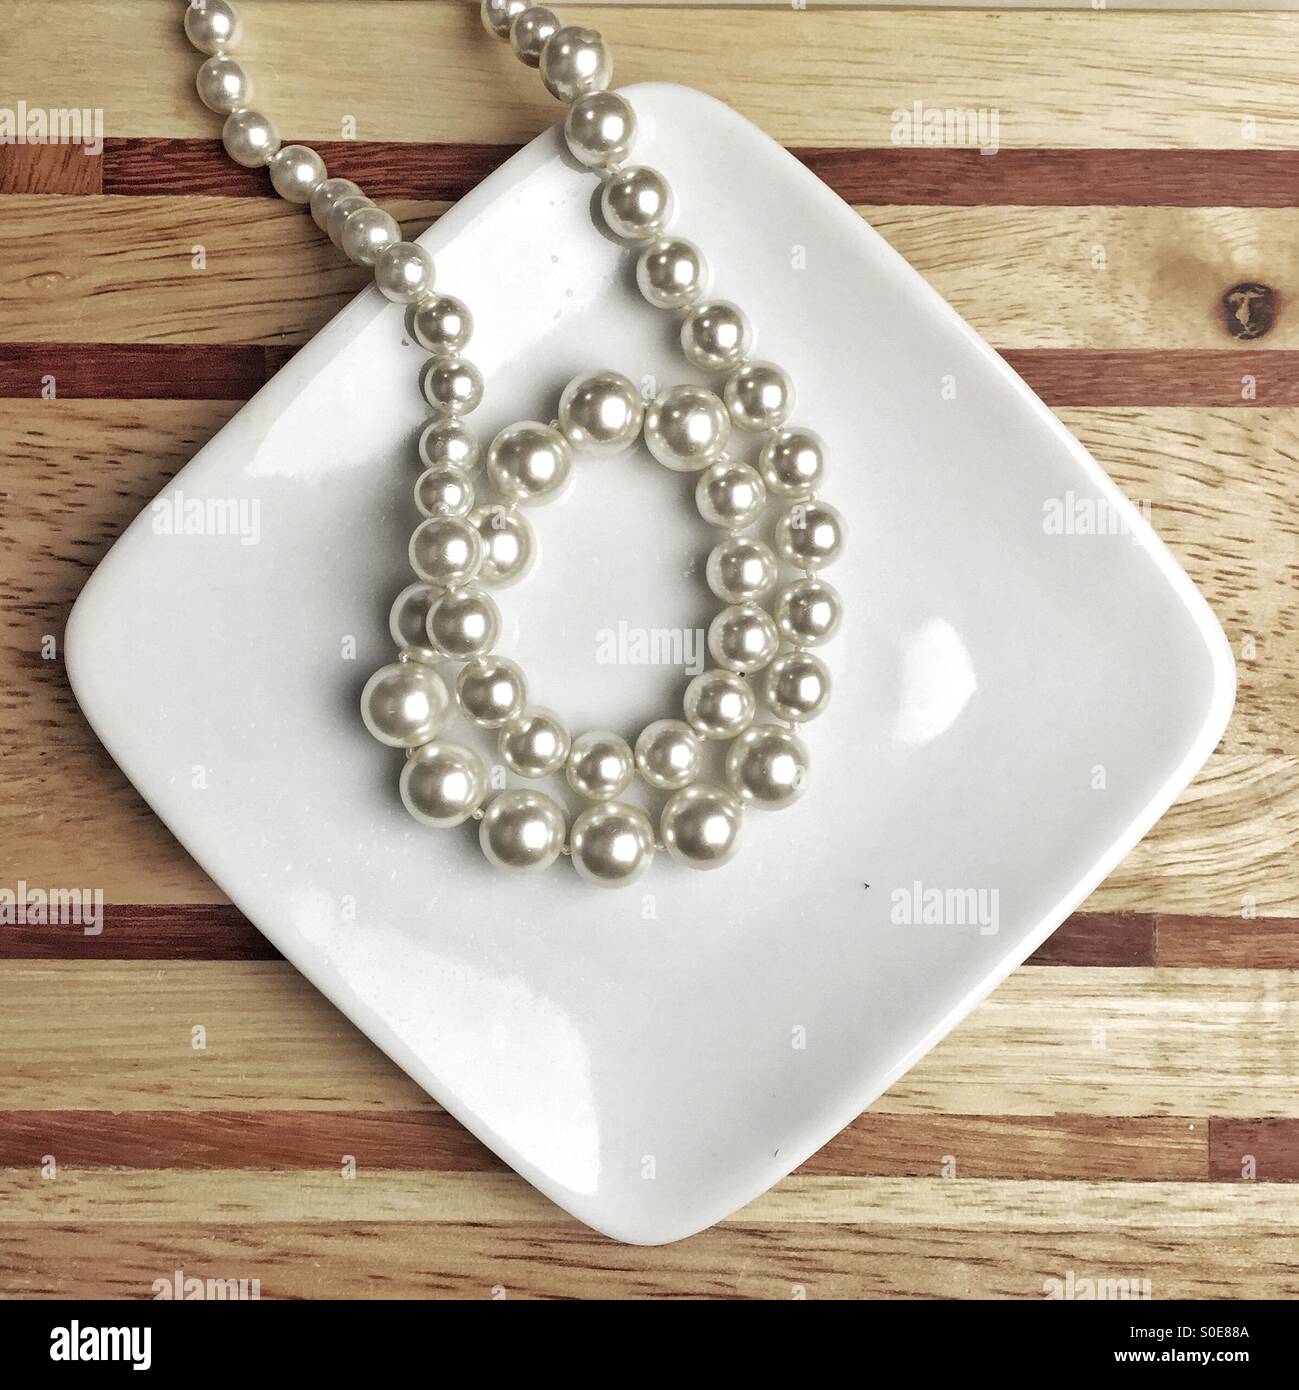 String of white pearls on a porcelain plate Stock Photo